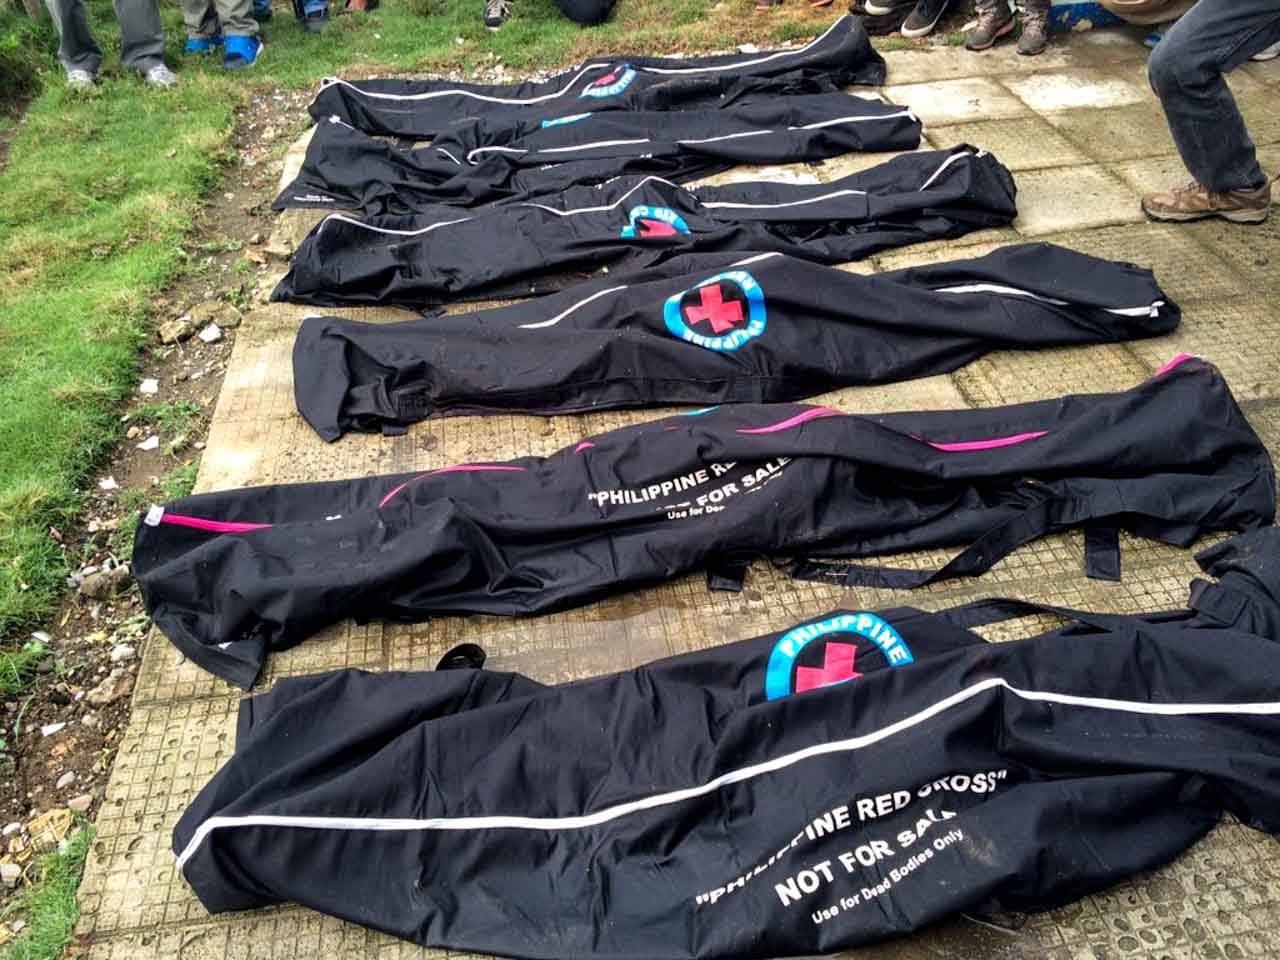 Remains of possible Yolanda victims found 2 years later